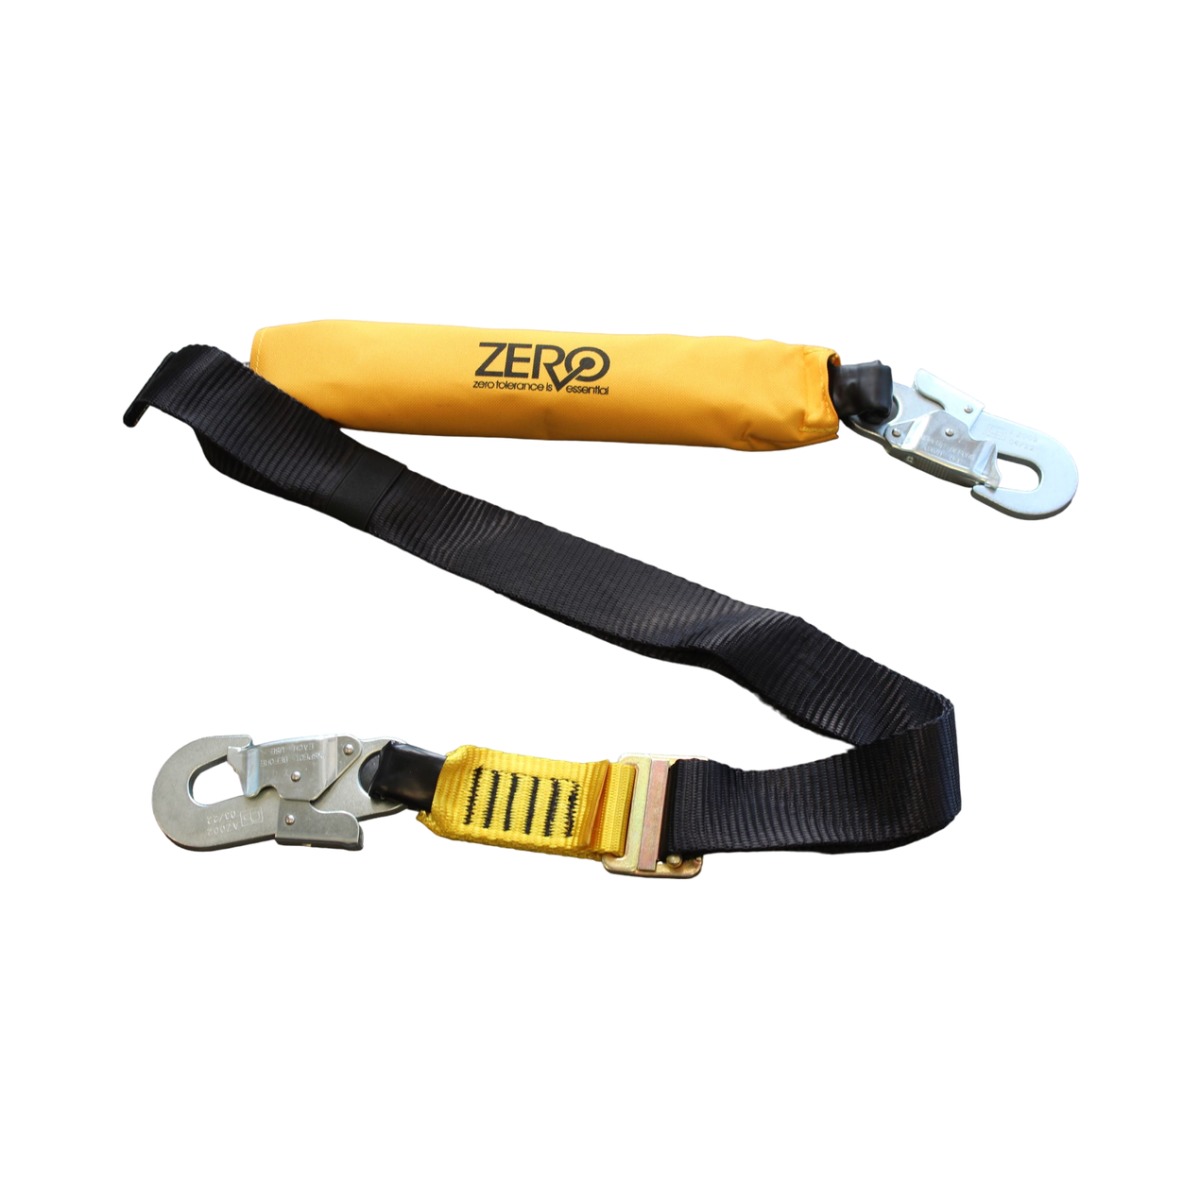 Buy Lanyard with Karabiners in Forklift Cages and Safety Gear from Astrolift NZ